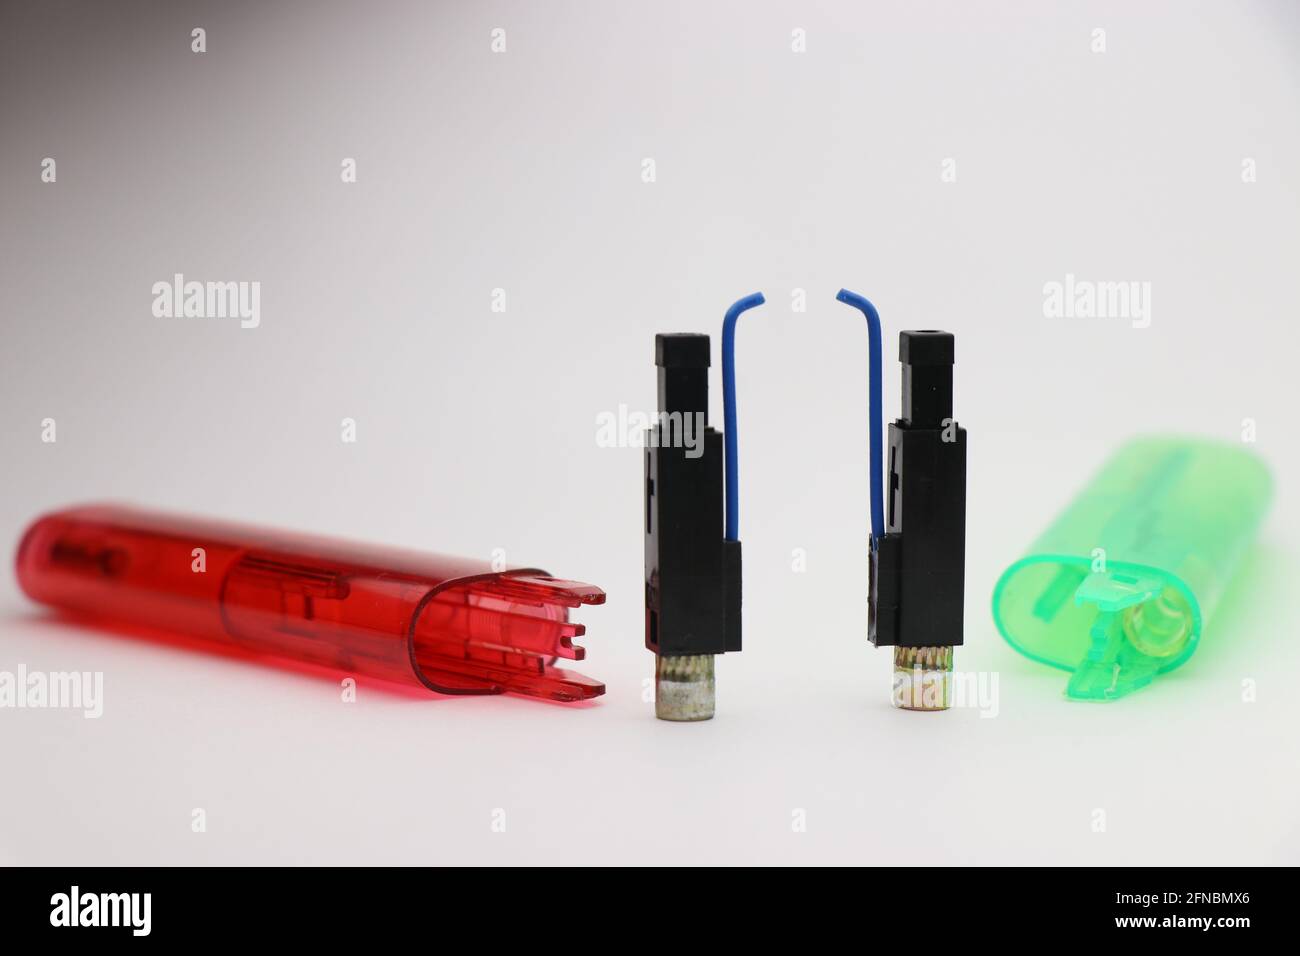 Dismantled fire lighters with close-up of Piezo ignition device on white background Stock Photo